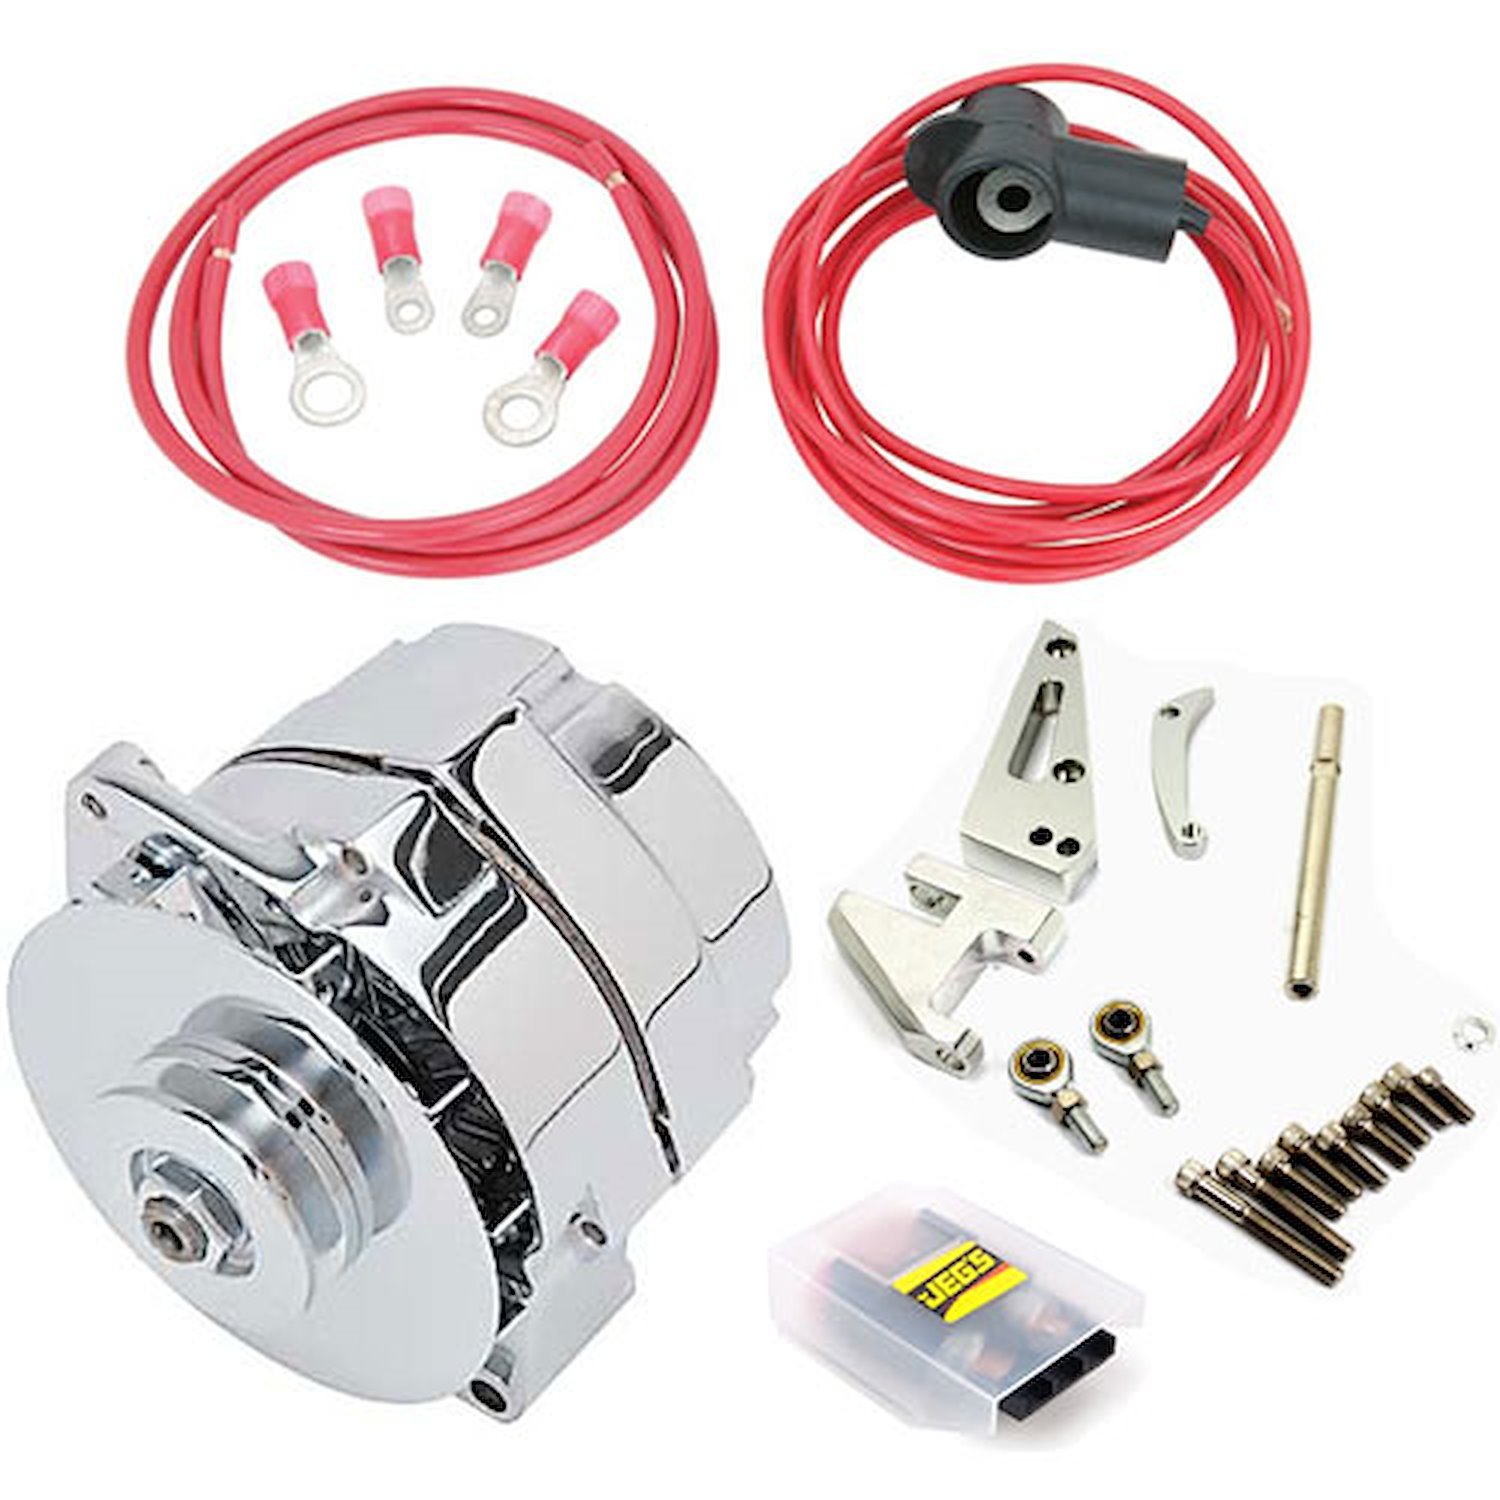 100 AMP Alternator Kit Small Block Chevy With